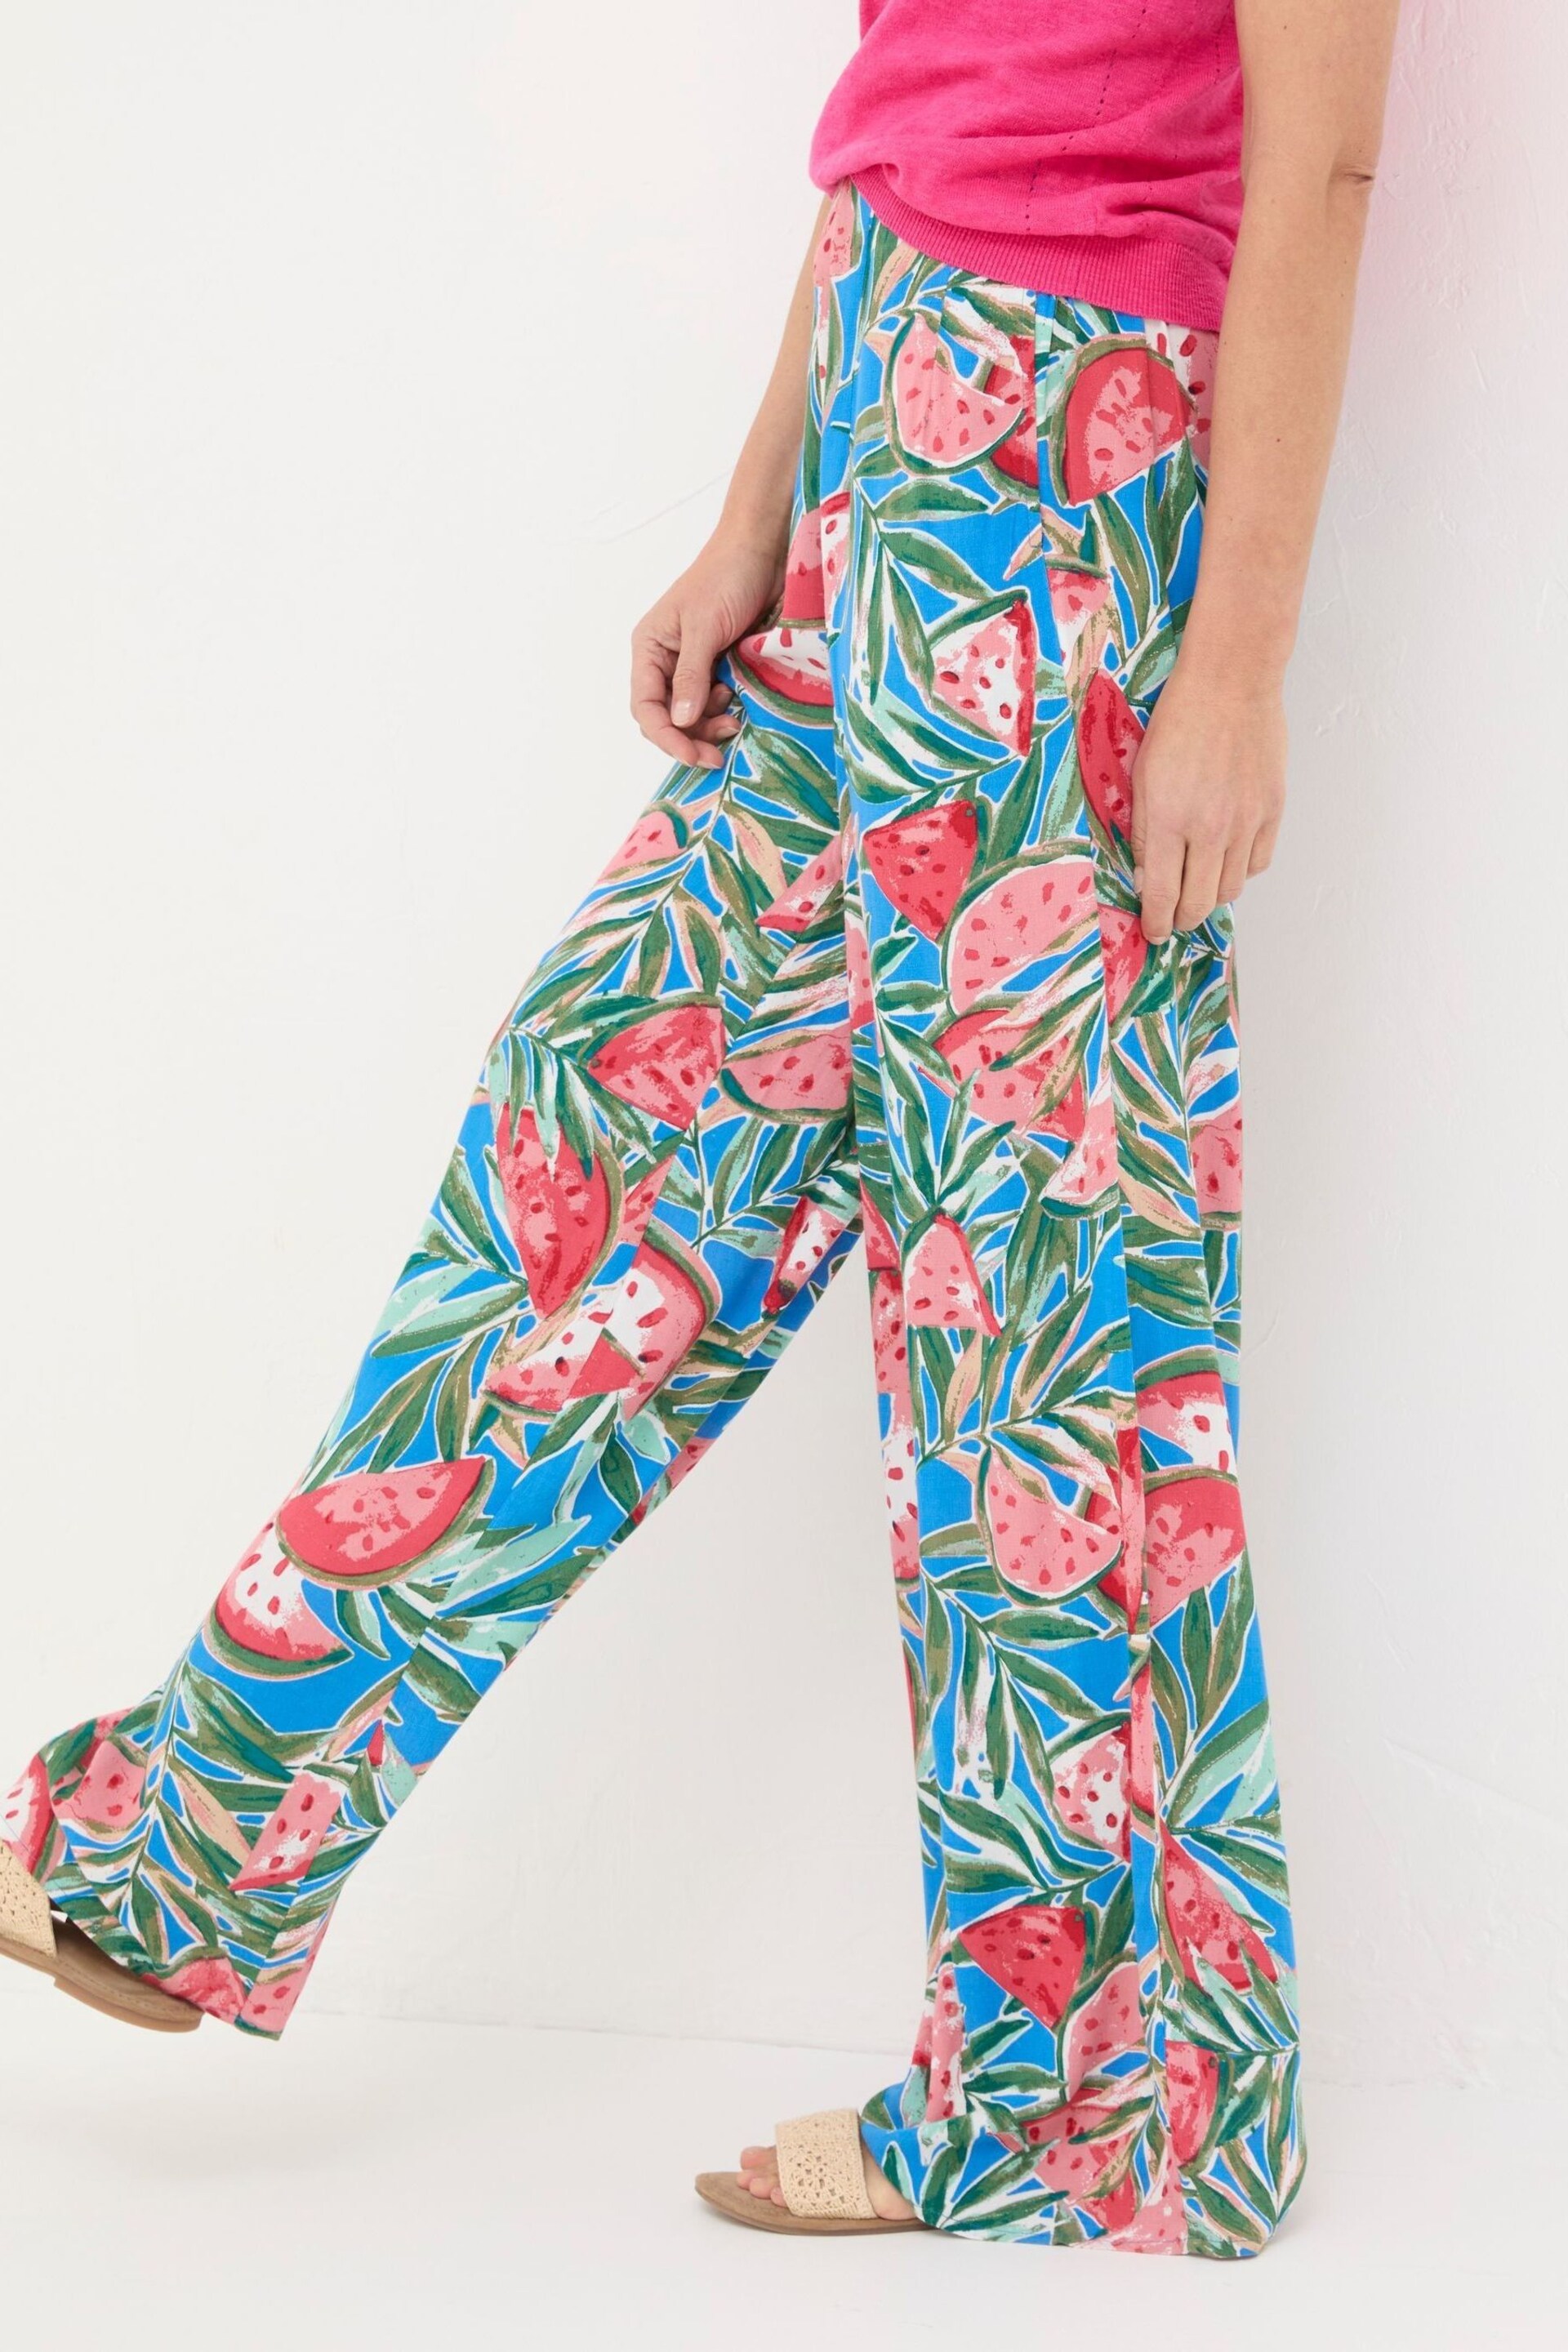 FatFace Blue Ines Watermelons Wide Leg Trousers - Image 3 of 6